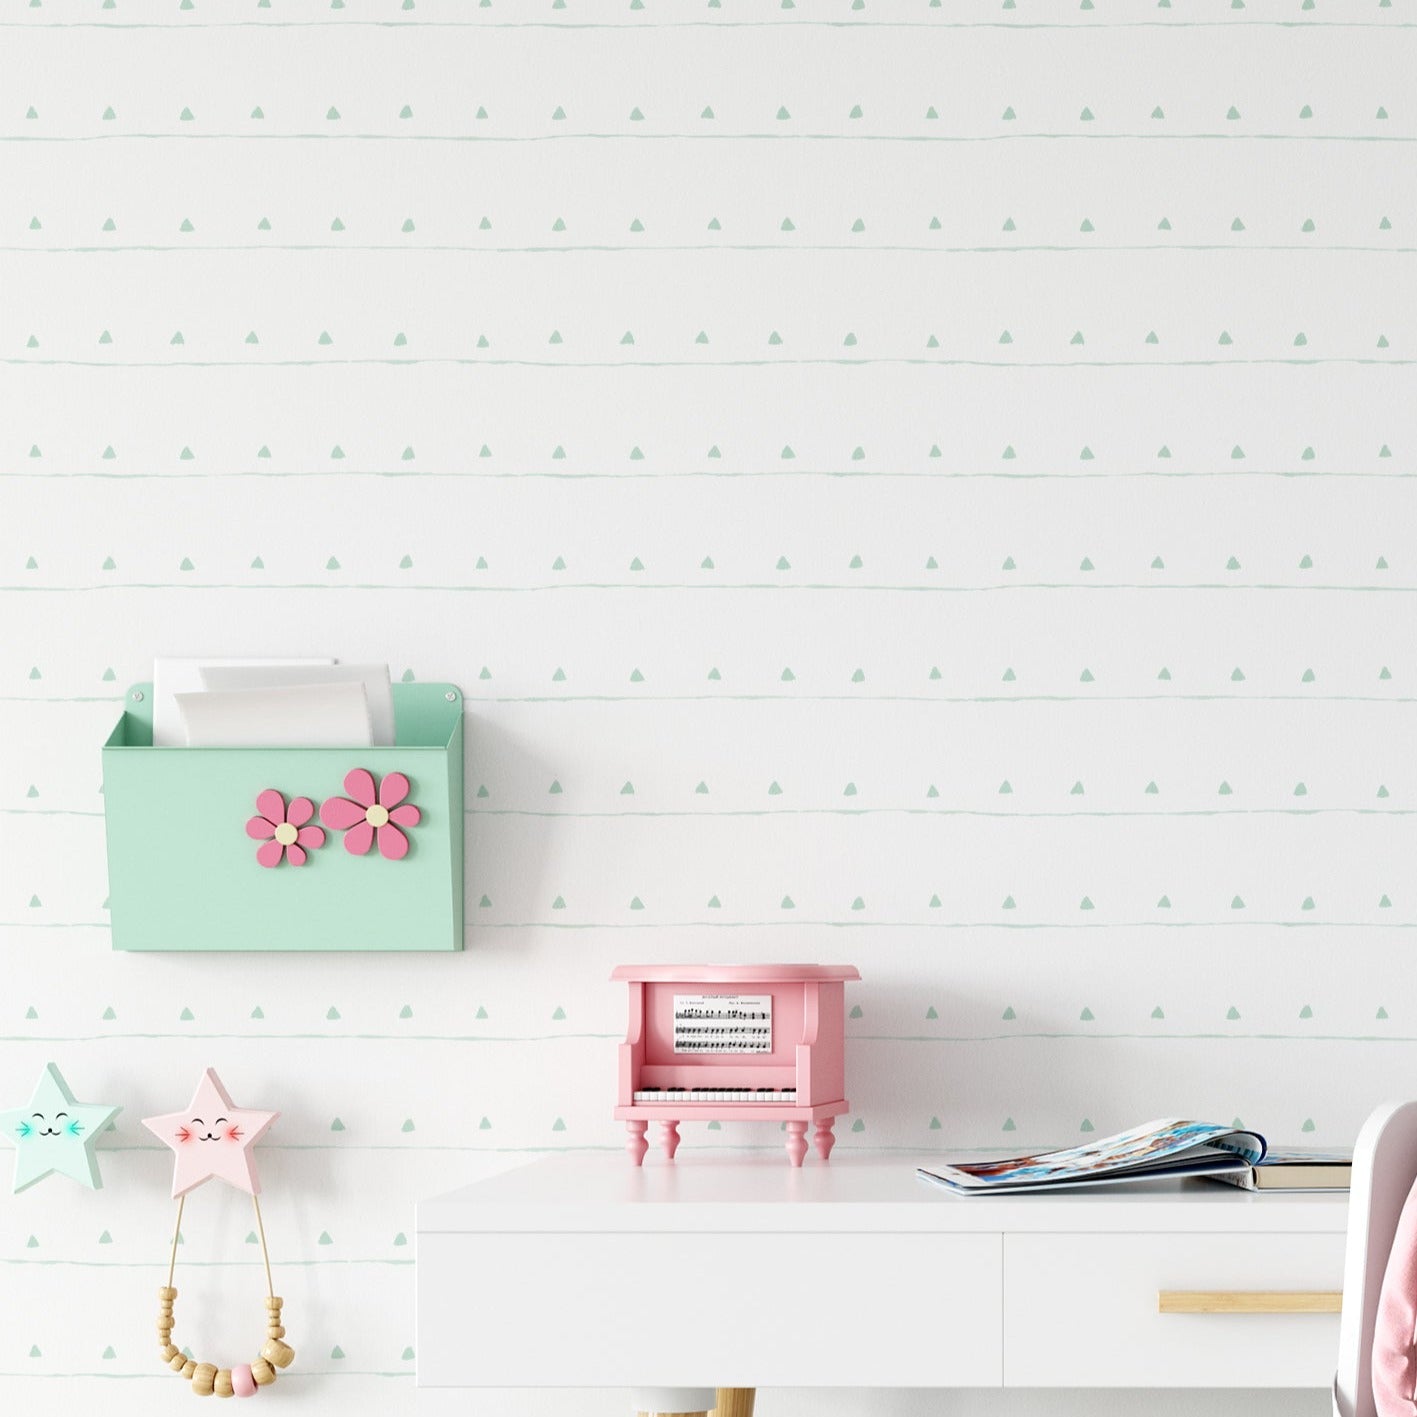 A stylish children's workspace set against the Kids Boho Wallpaper - 132 with a light green backdrop and delicate white triangles, decorated with a modern desk, toys, and vibrant accessories